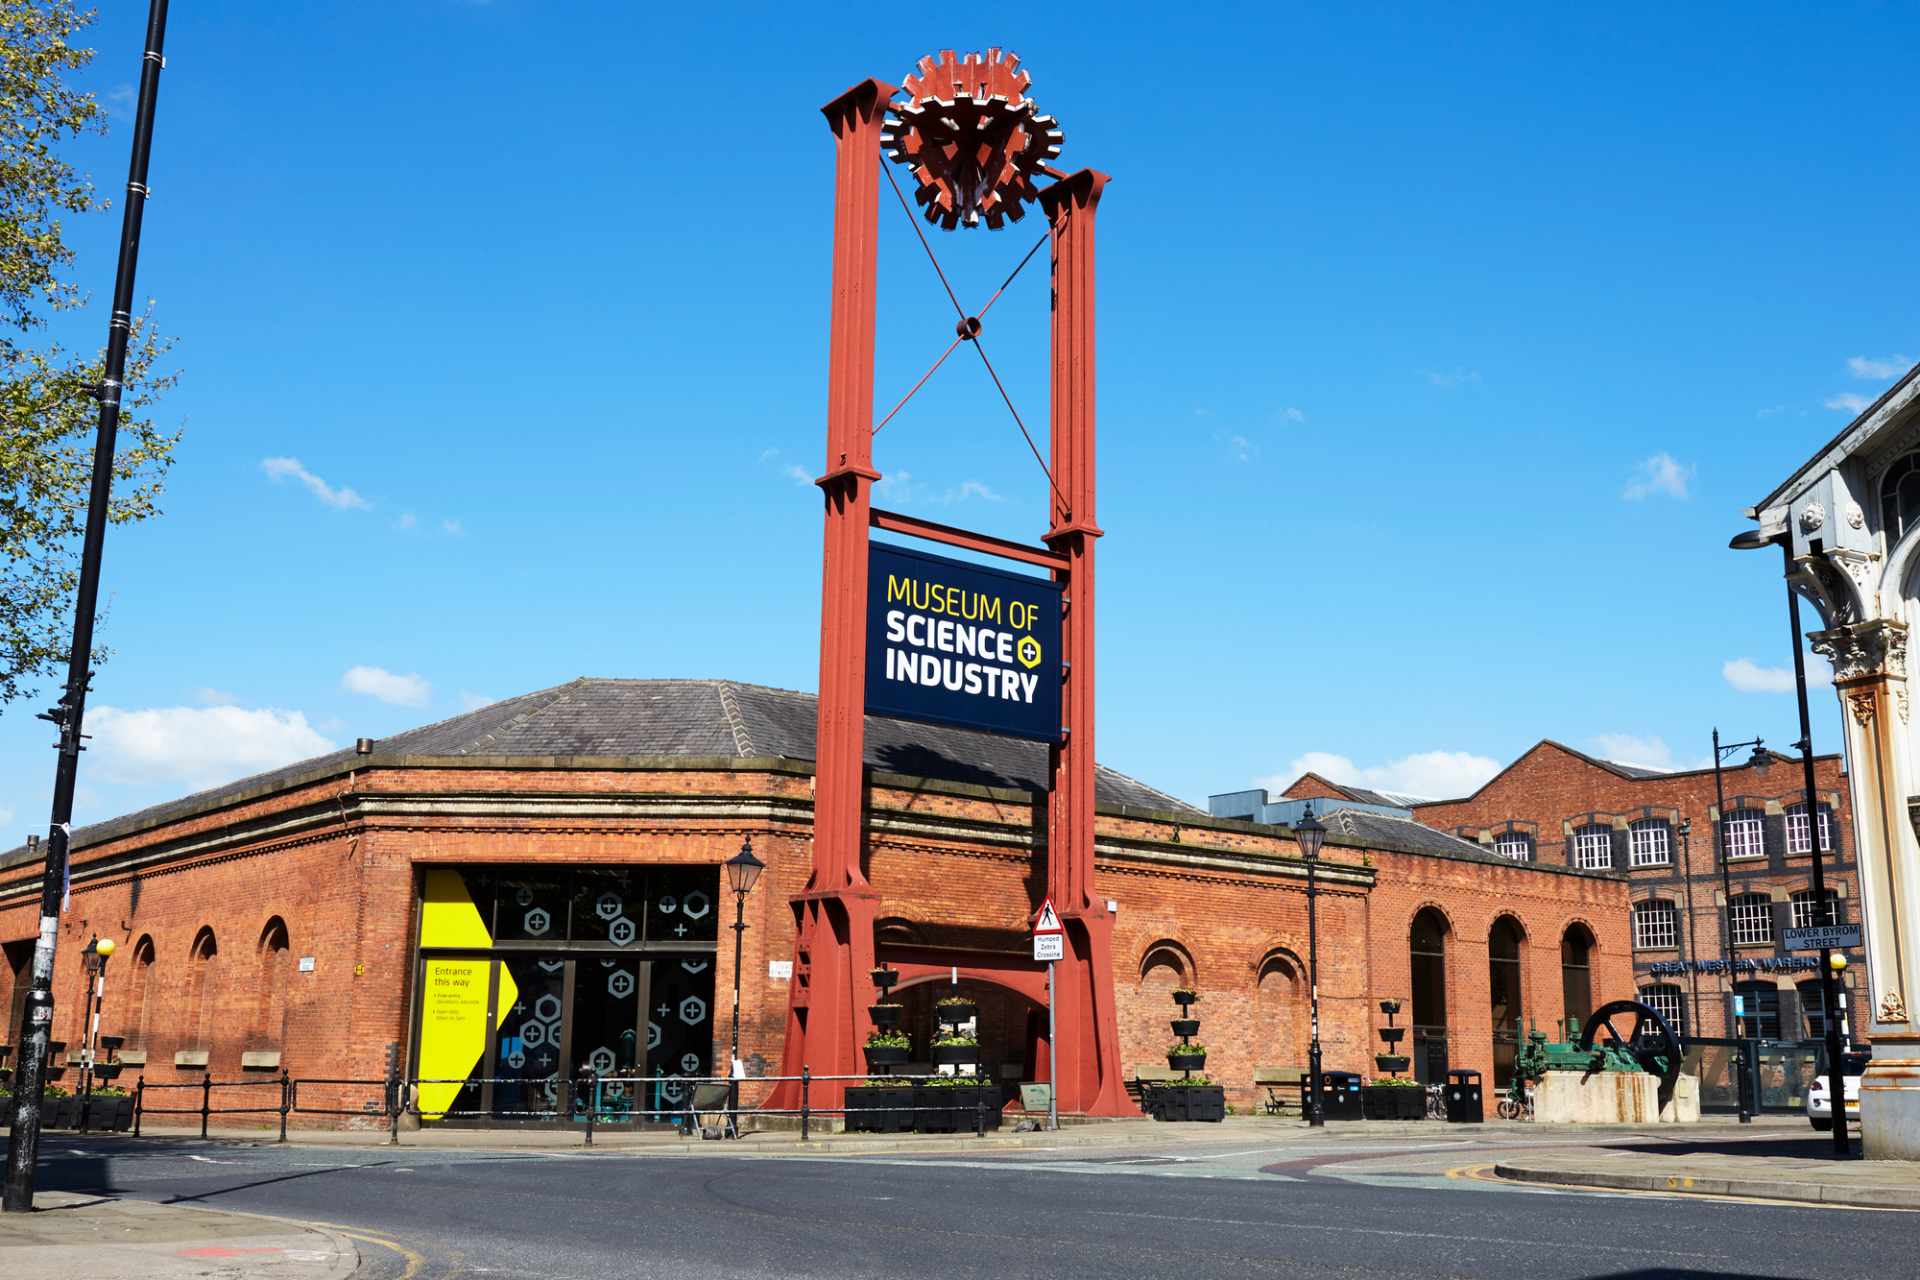 exterior-of-science-and-industry-museum-on-sunny-day-indoor-activities-manchester